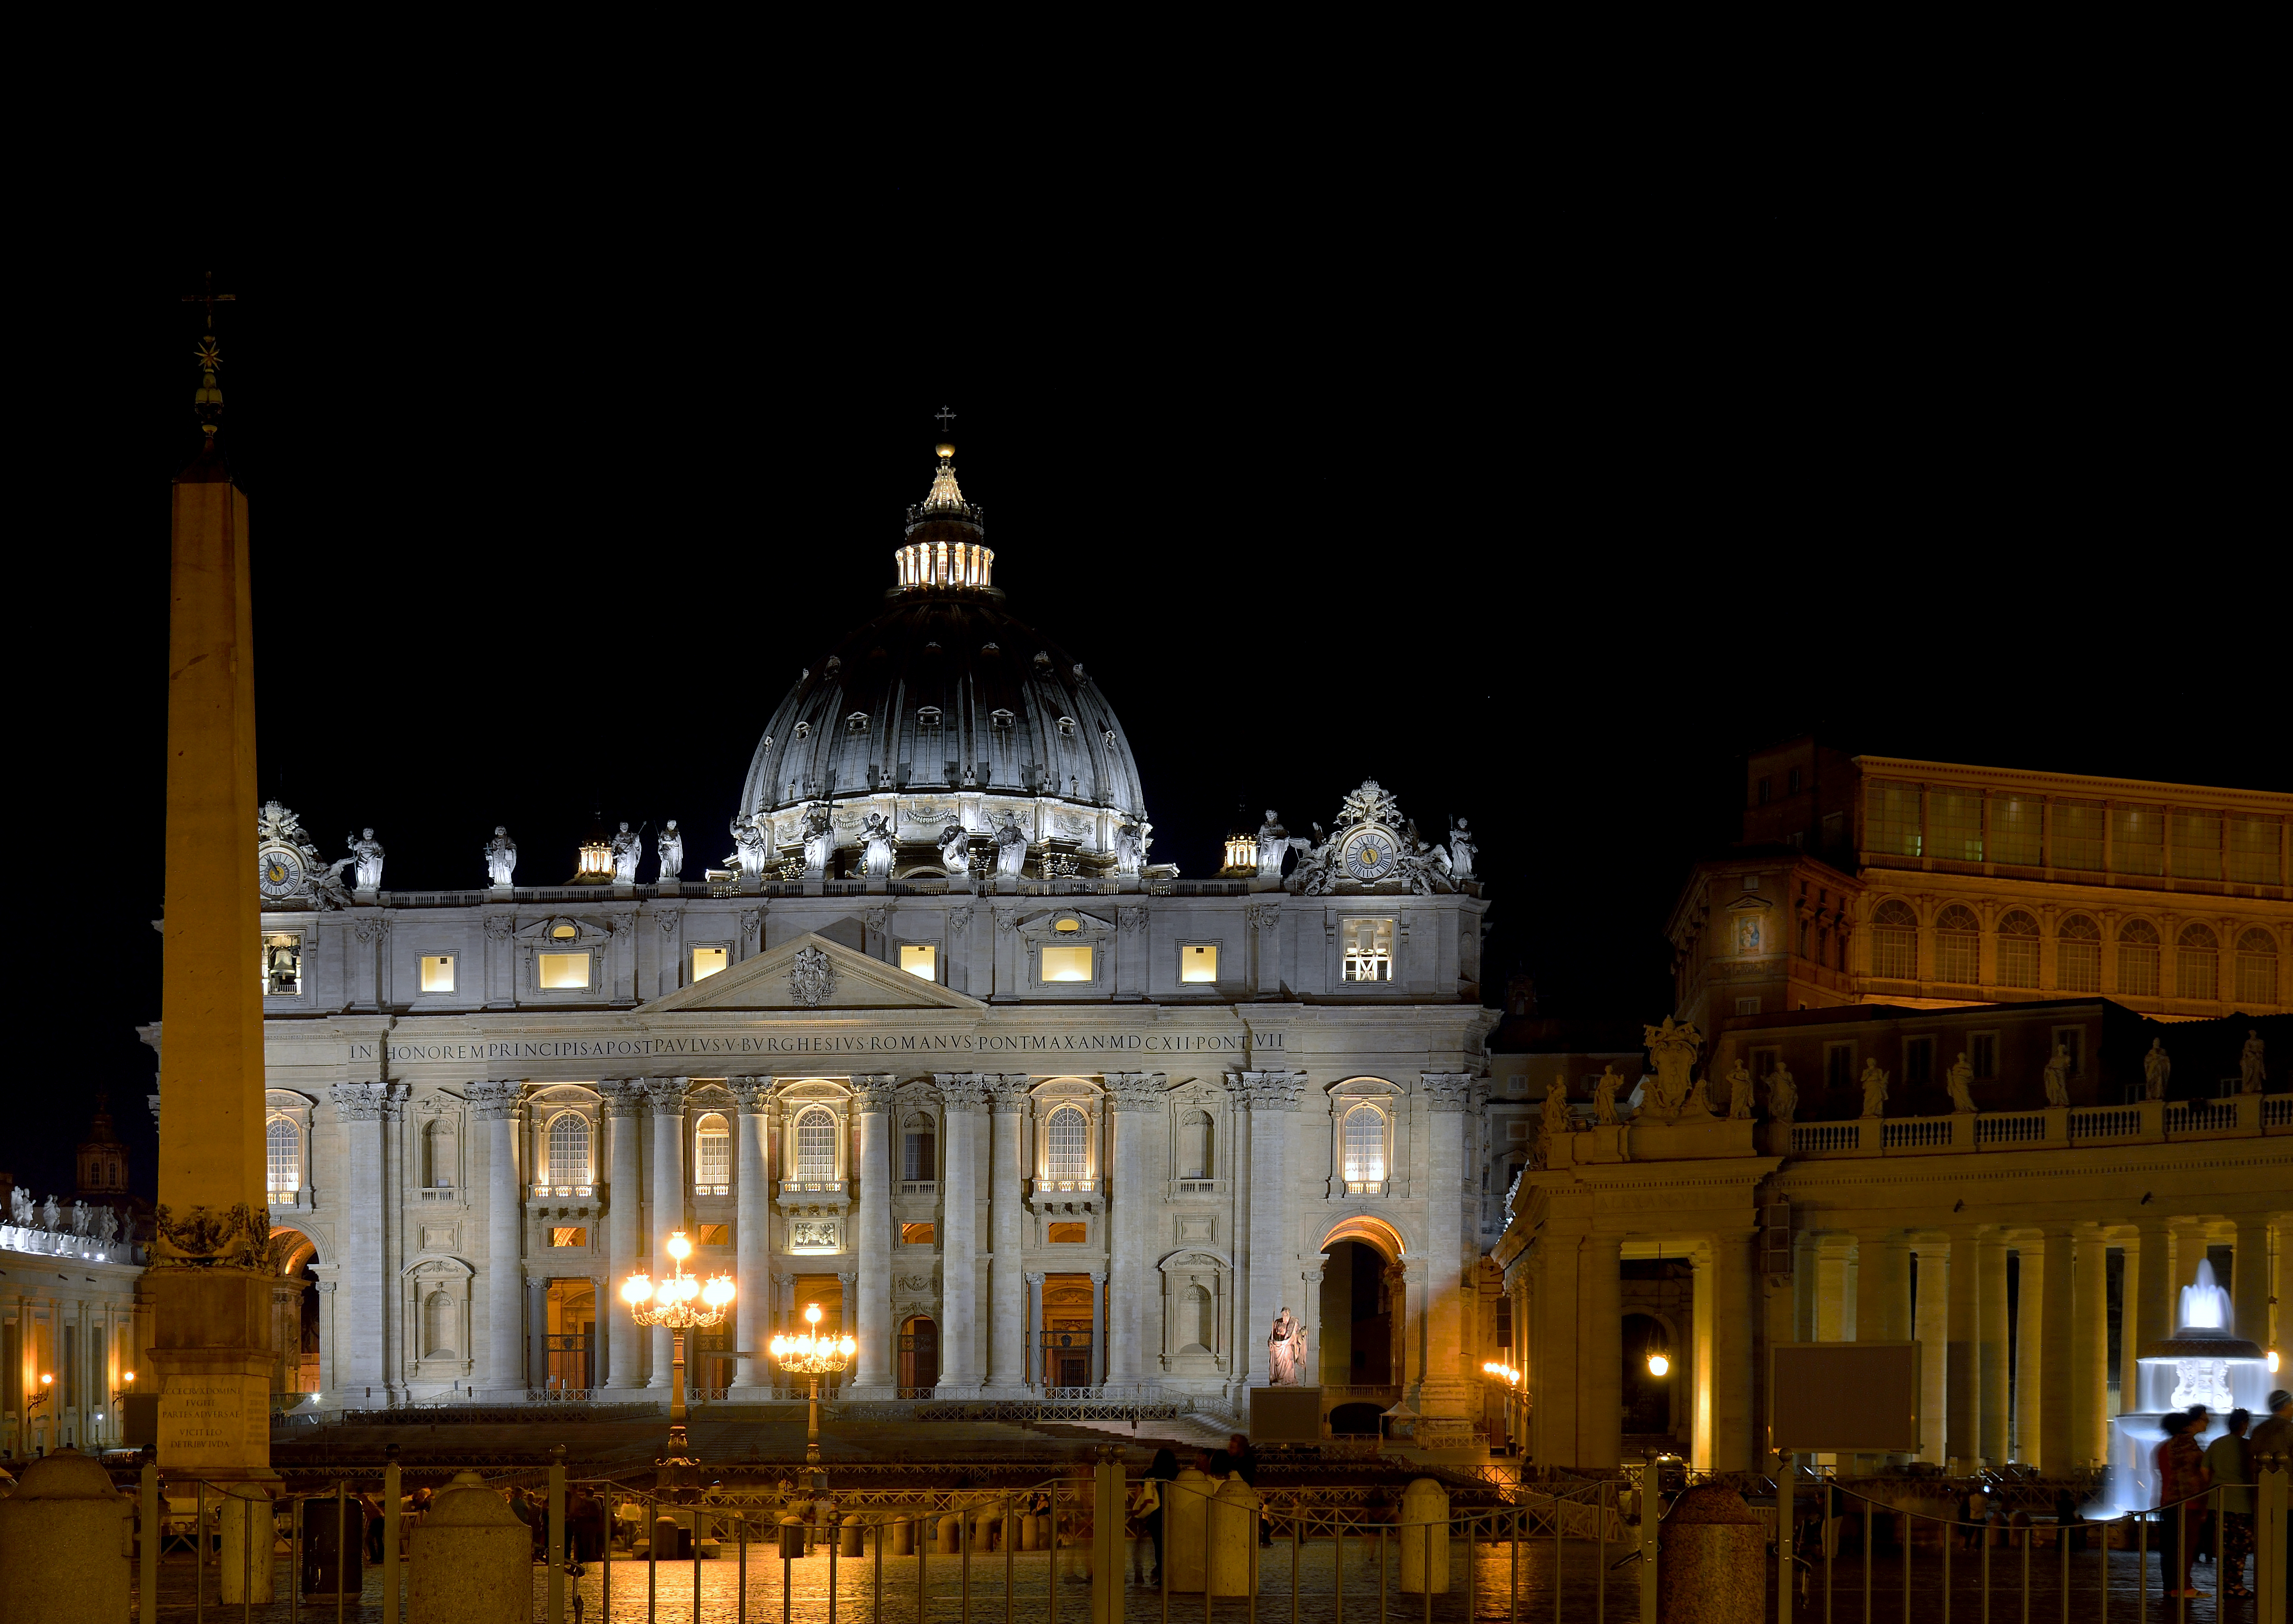 St. Peter and obelisk at night